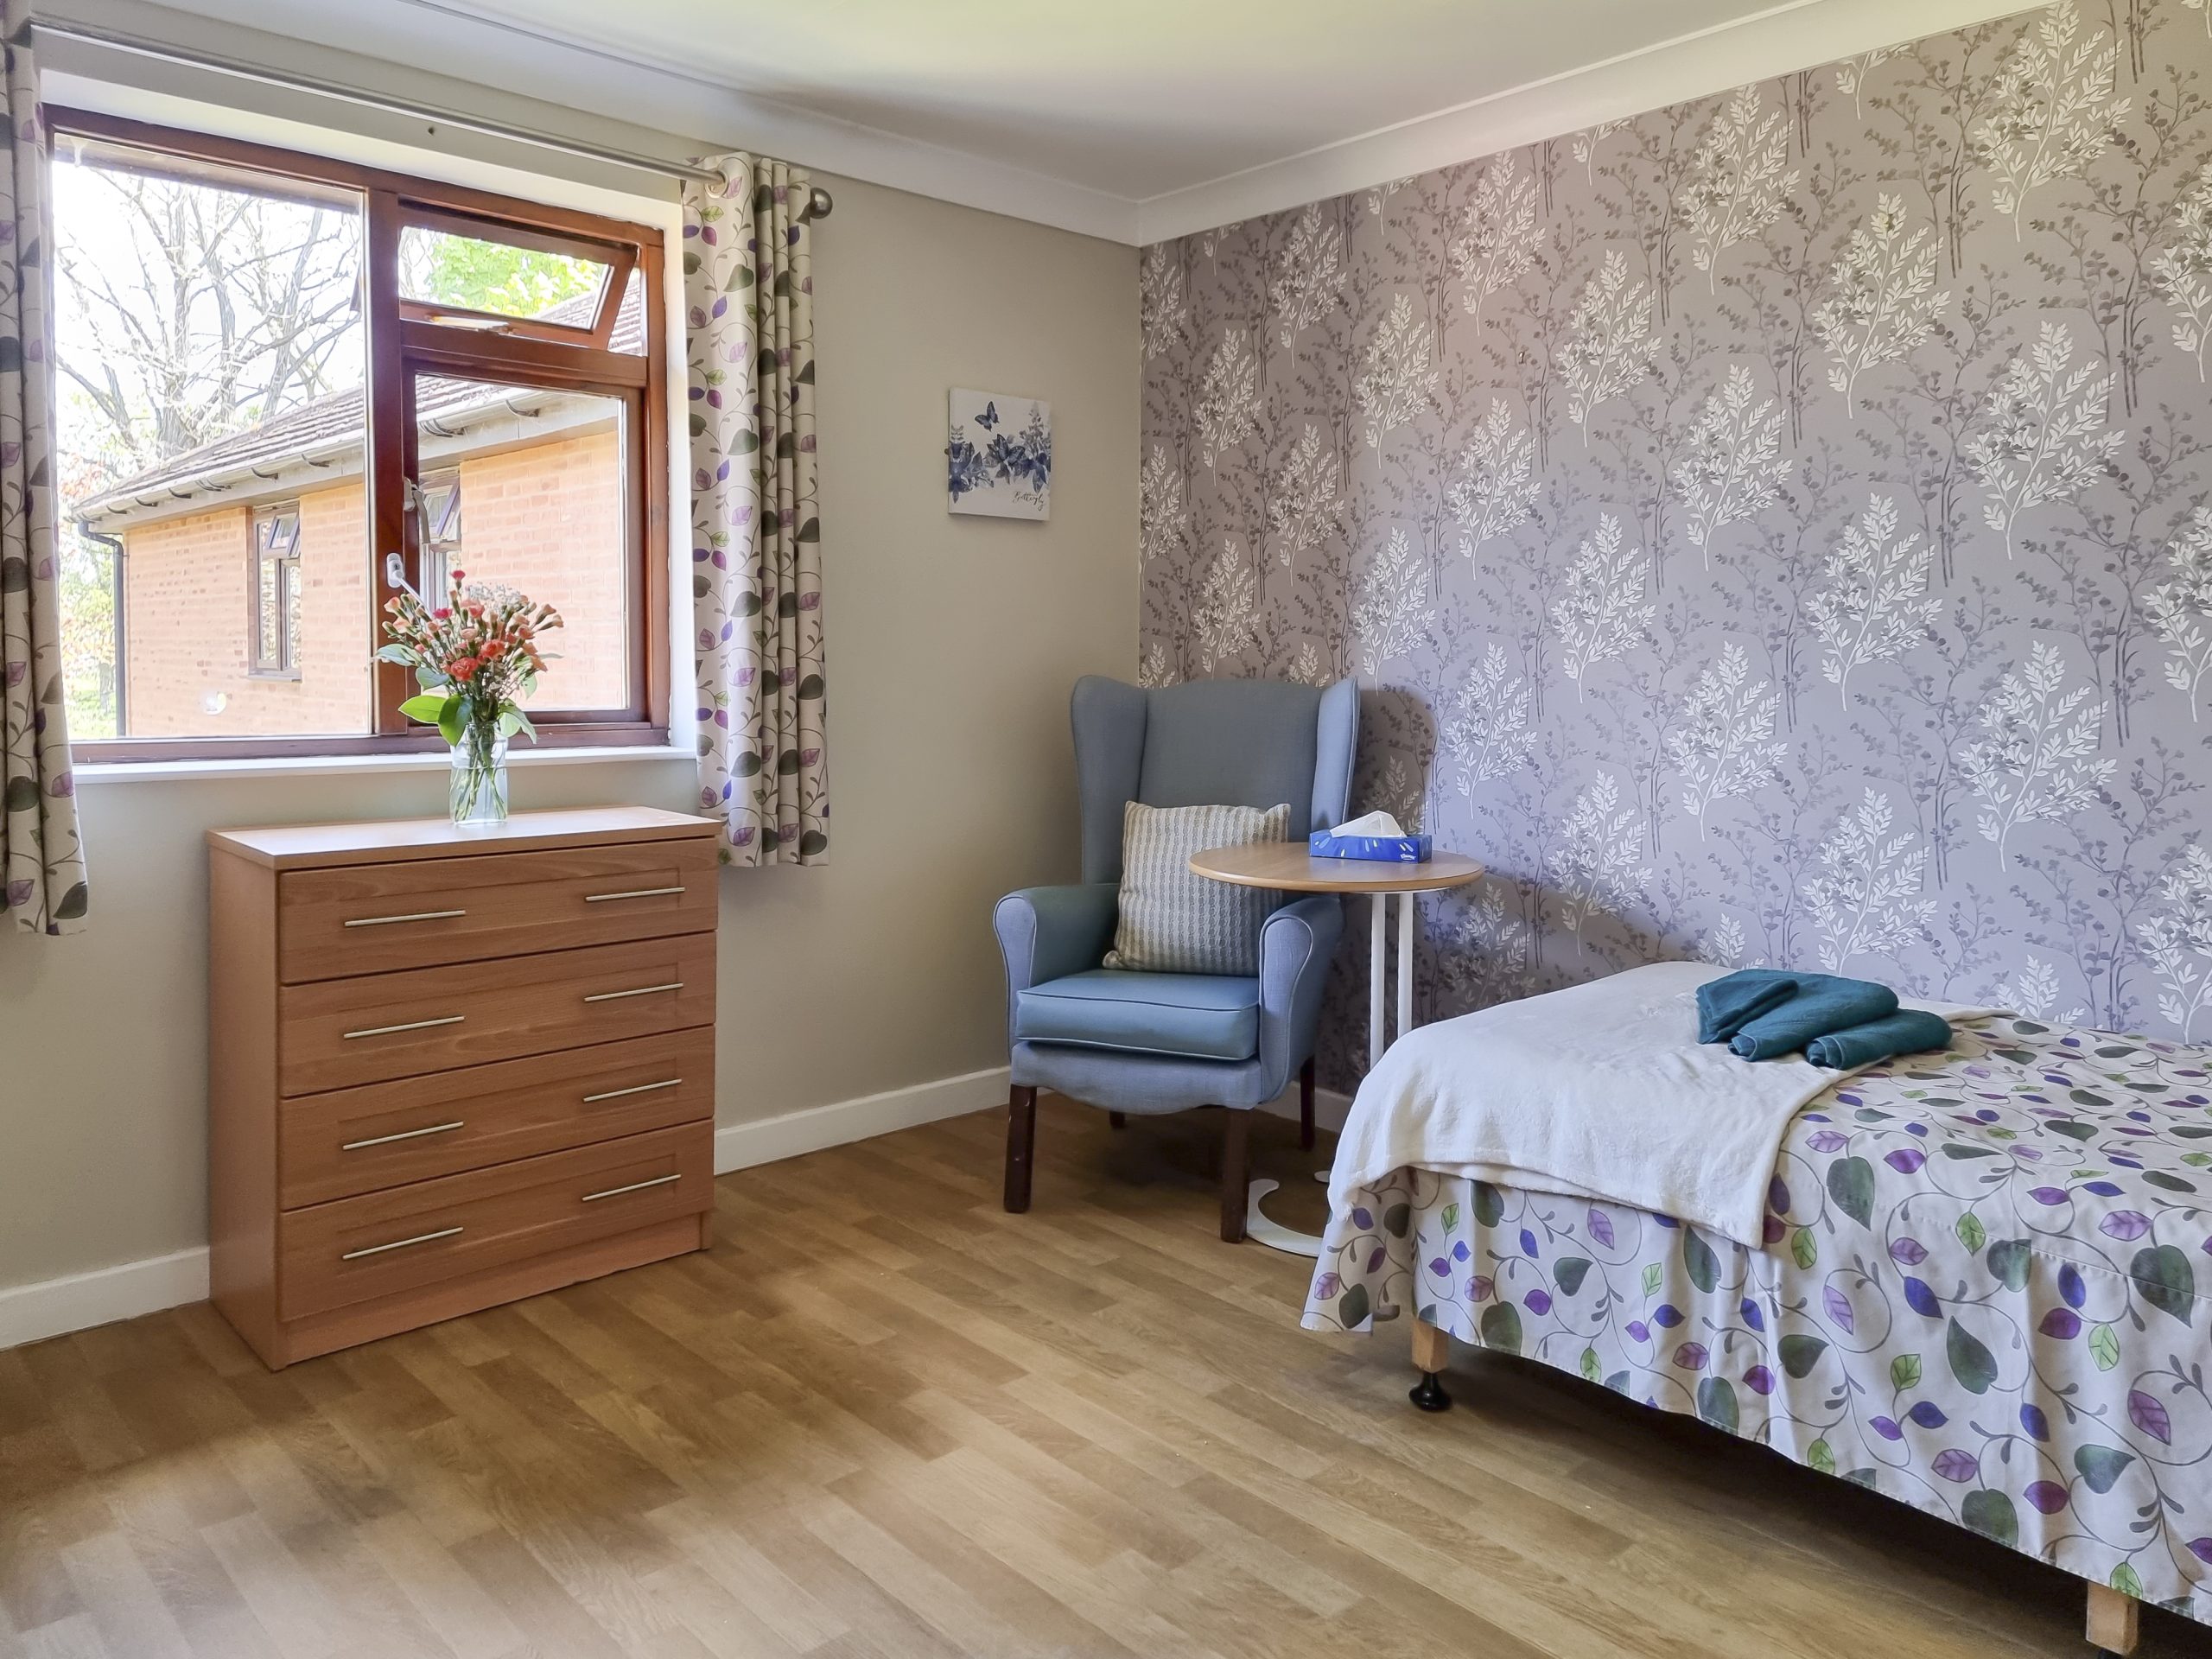 Buckland Care Homes